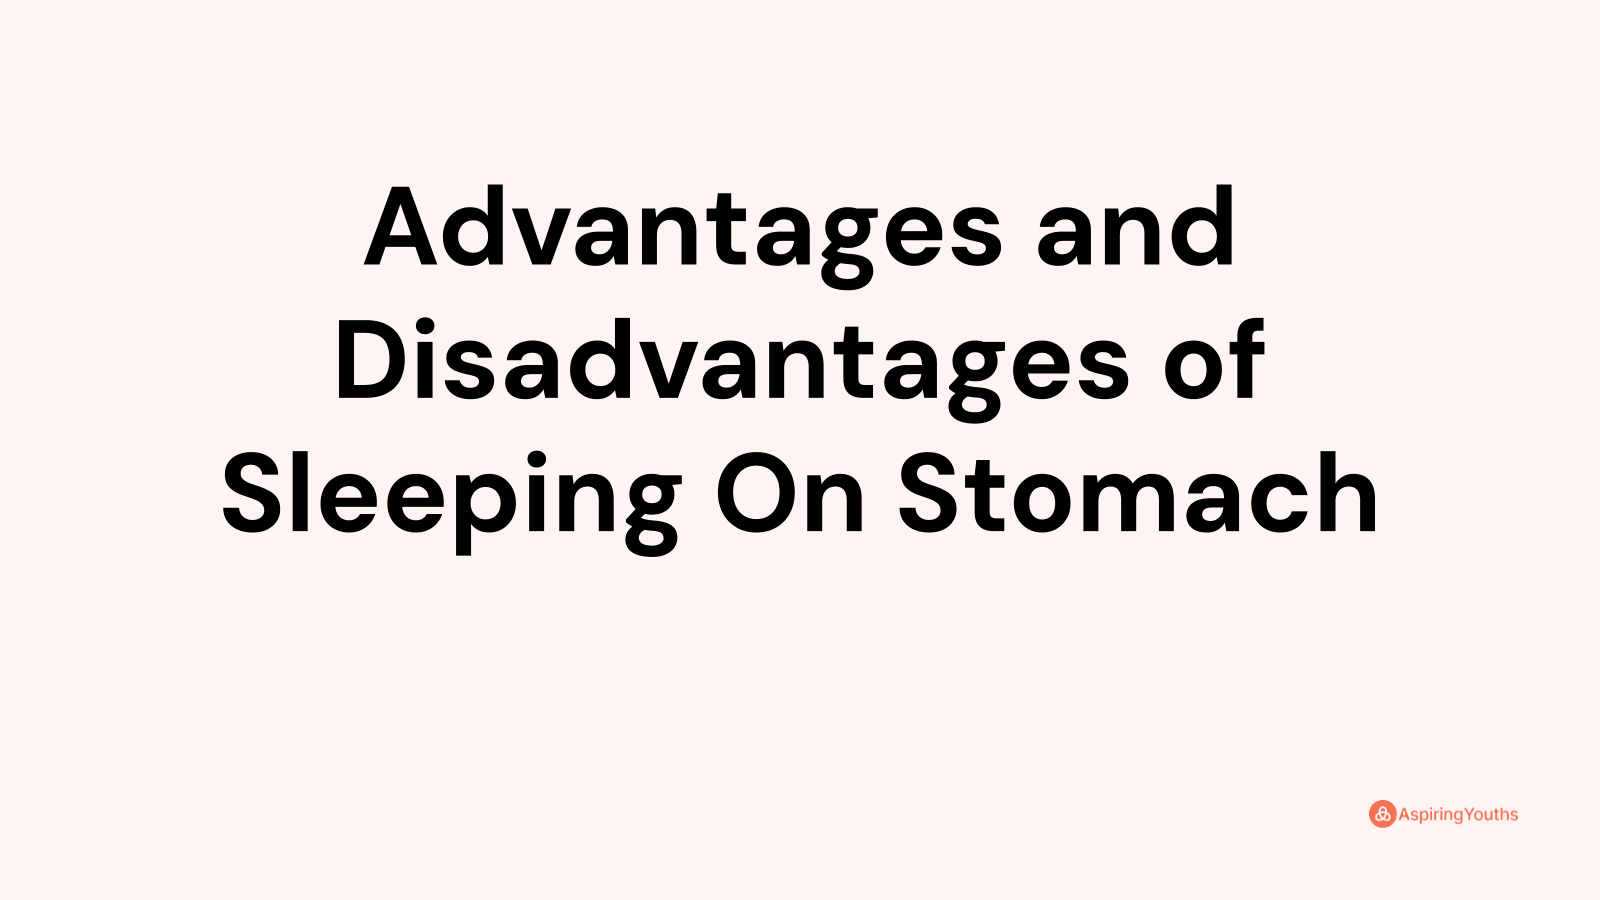 Advantages and disadvantages of Sleeping On Stomach